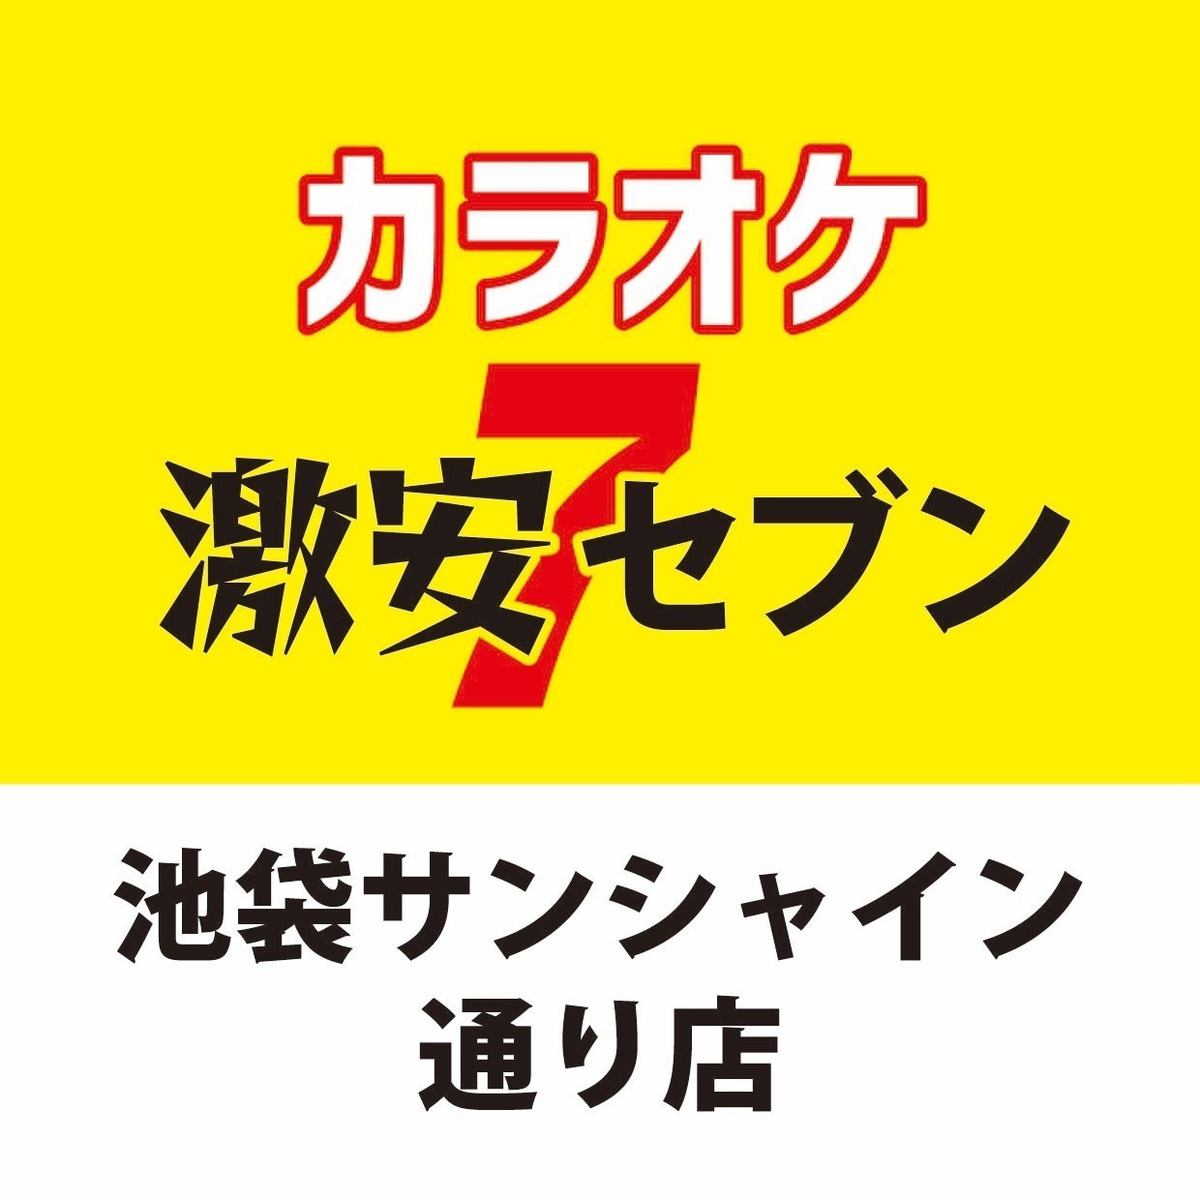 All-you-can-eat and drink coupons available ☆ If you want karaoke in Ikebukuro, go to Sunshine ☆